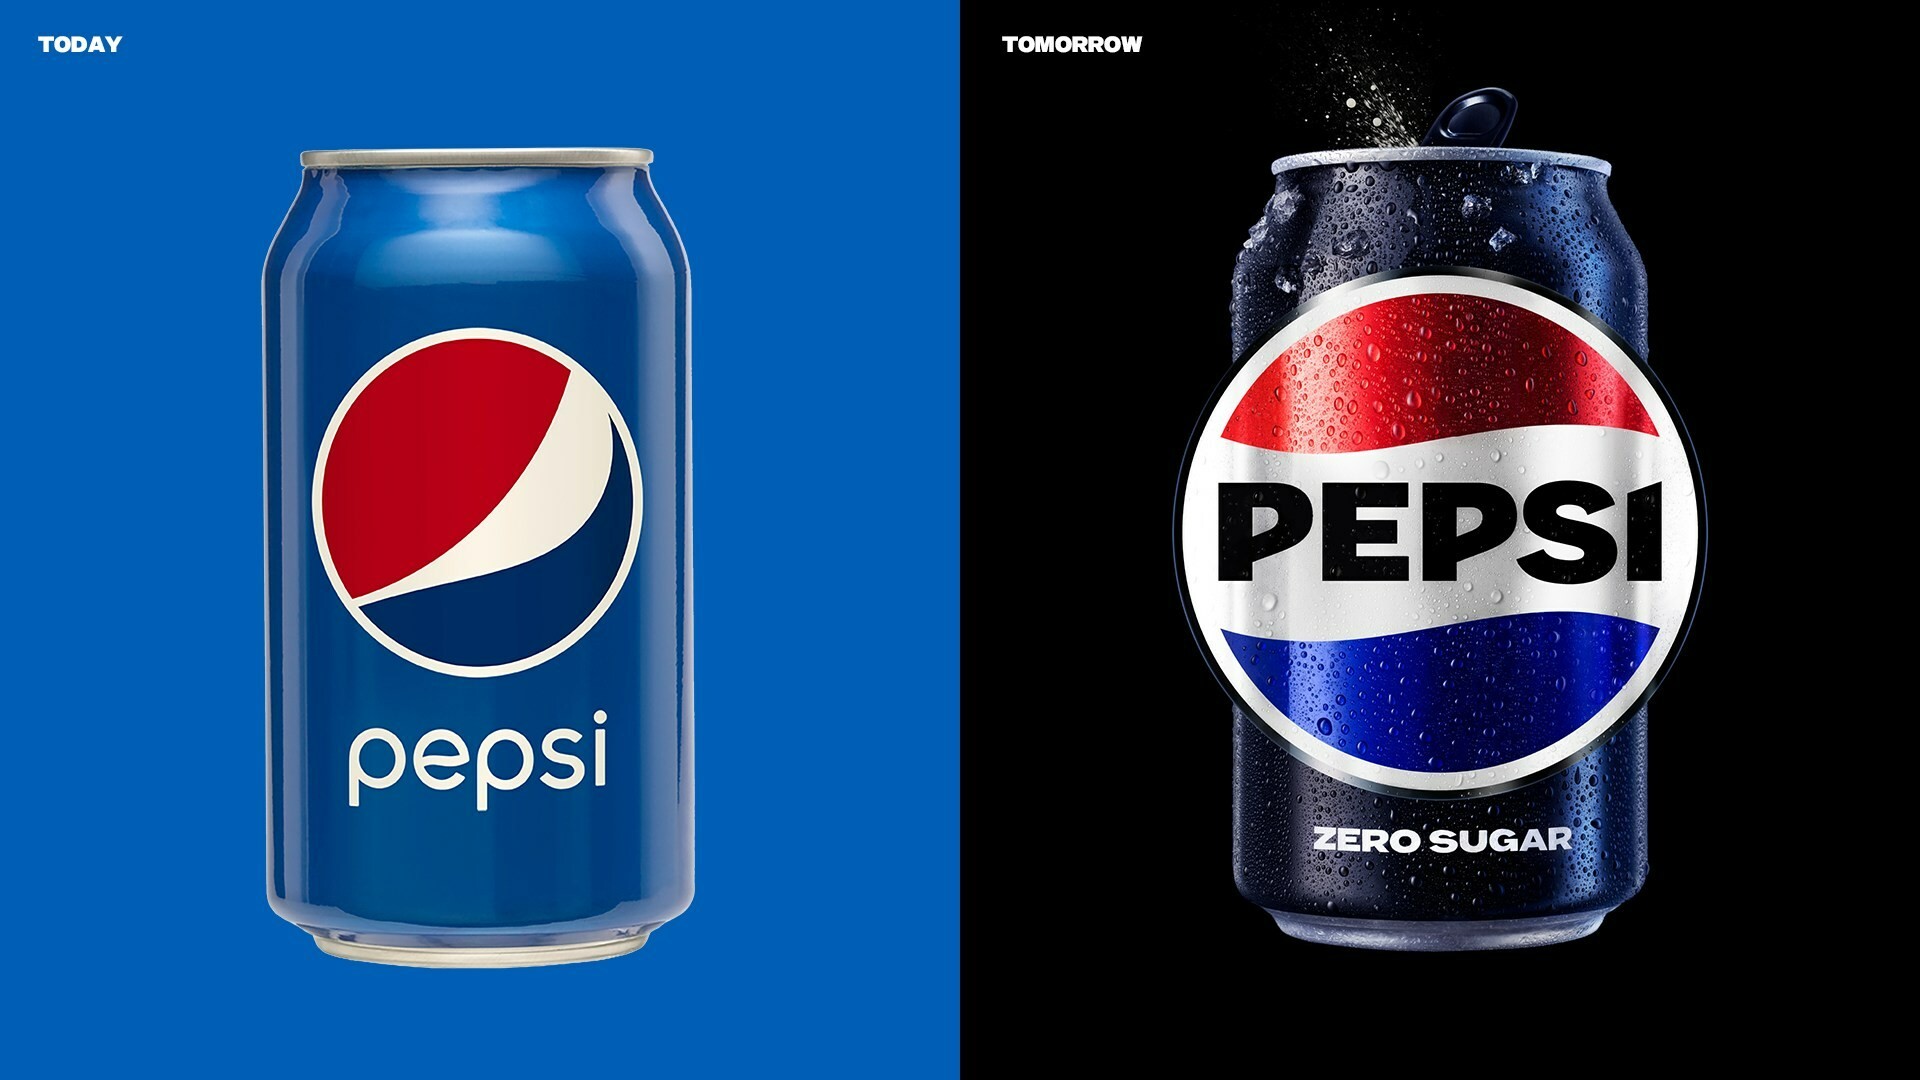 The new logo combines elements from Pepsi's past with modern touches and a bright, updated color palette.